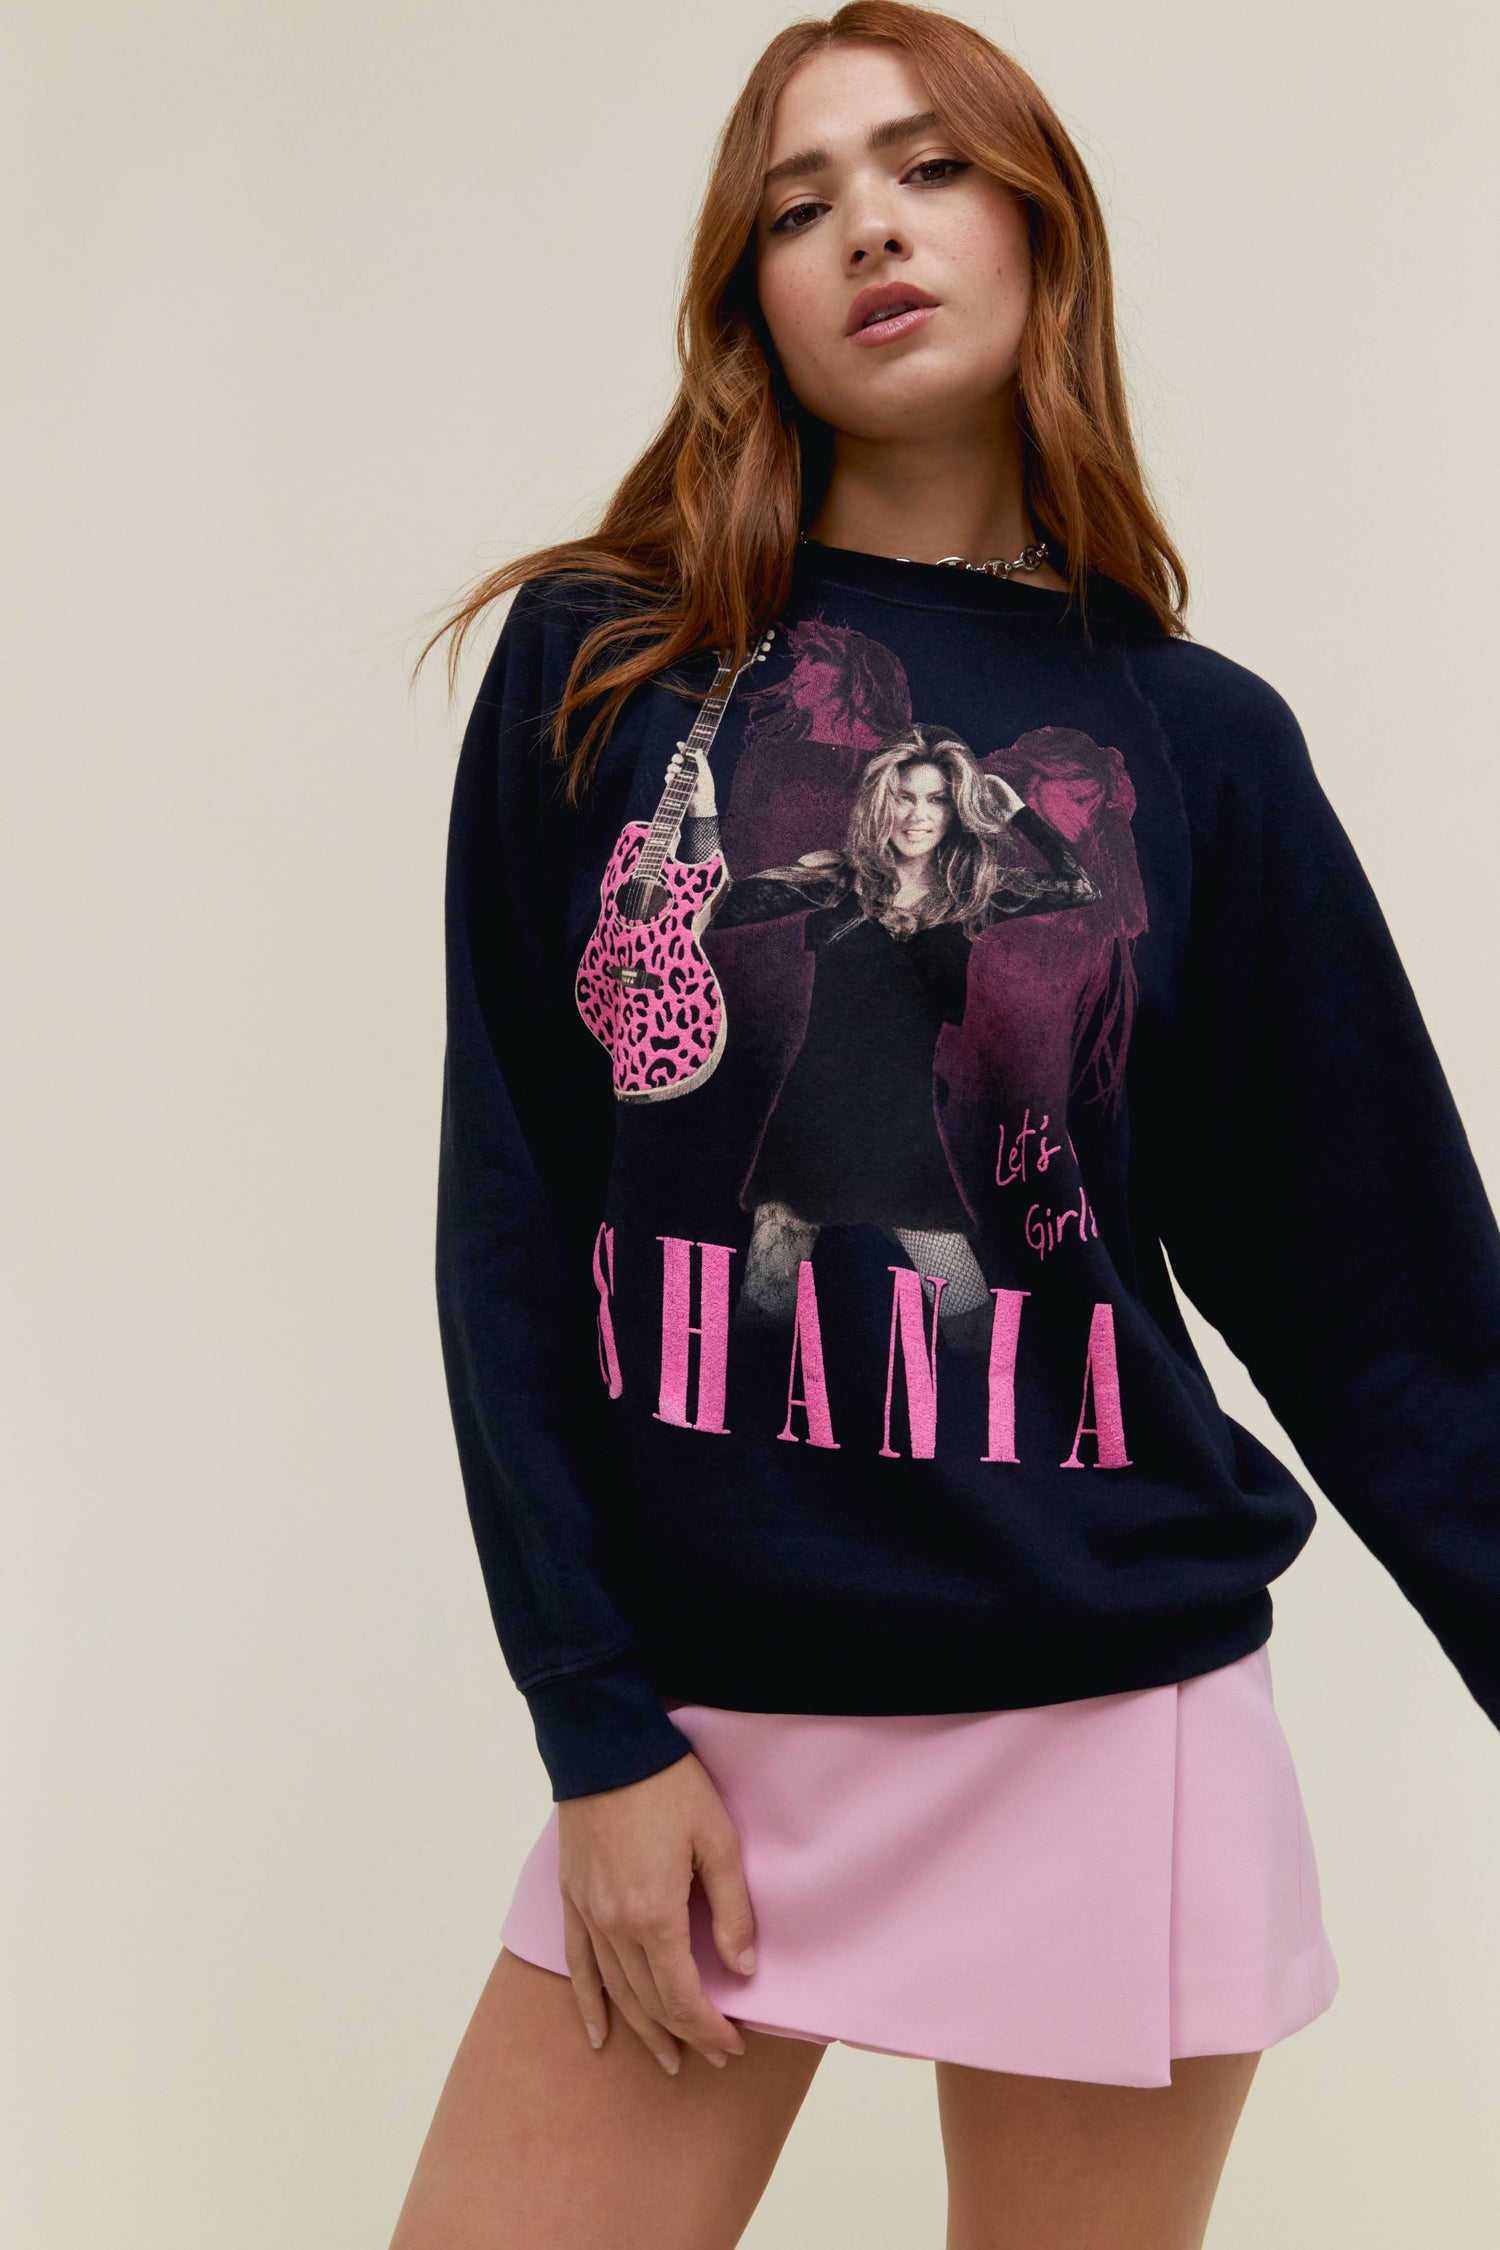 A model featuring a black sweatshirt stamped with "SHANIA" and a portrait of the artist holding a guitar.